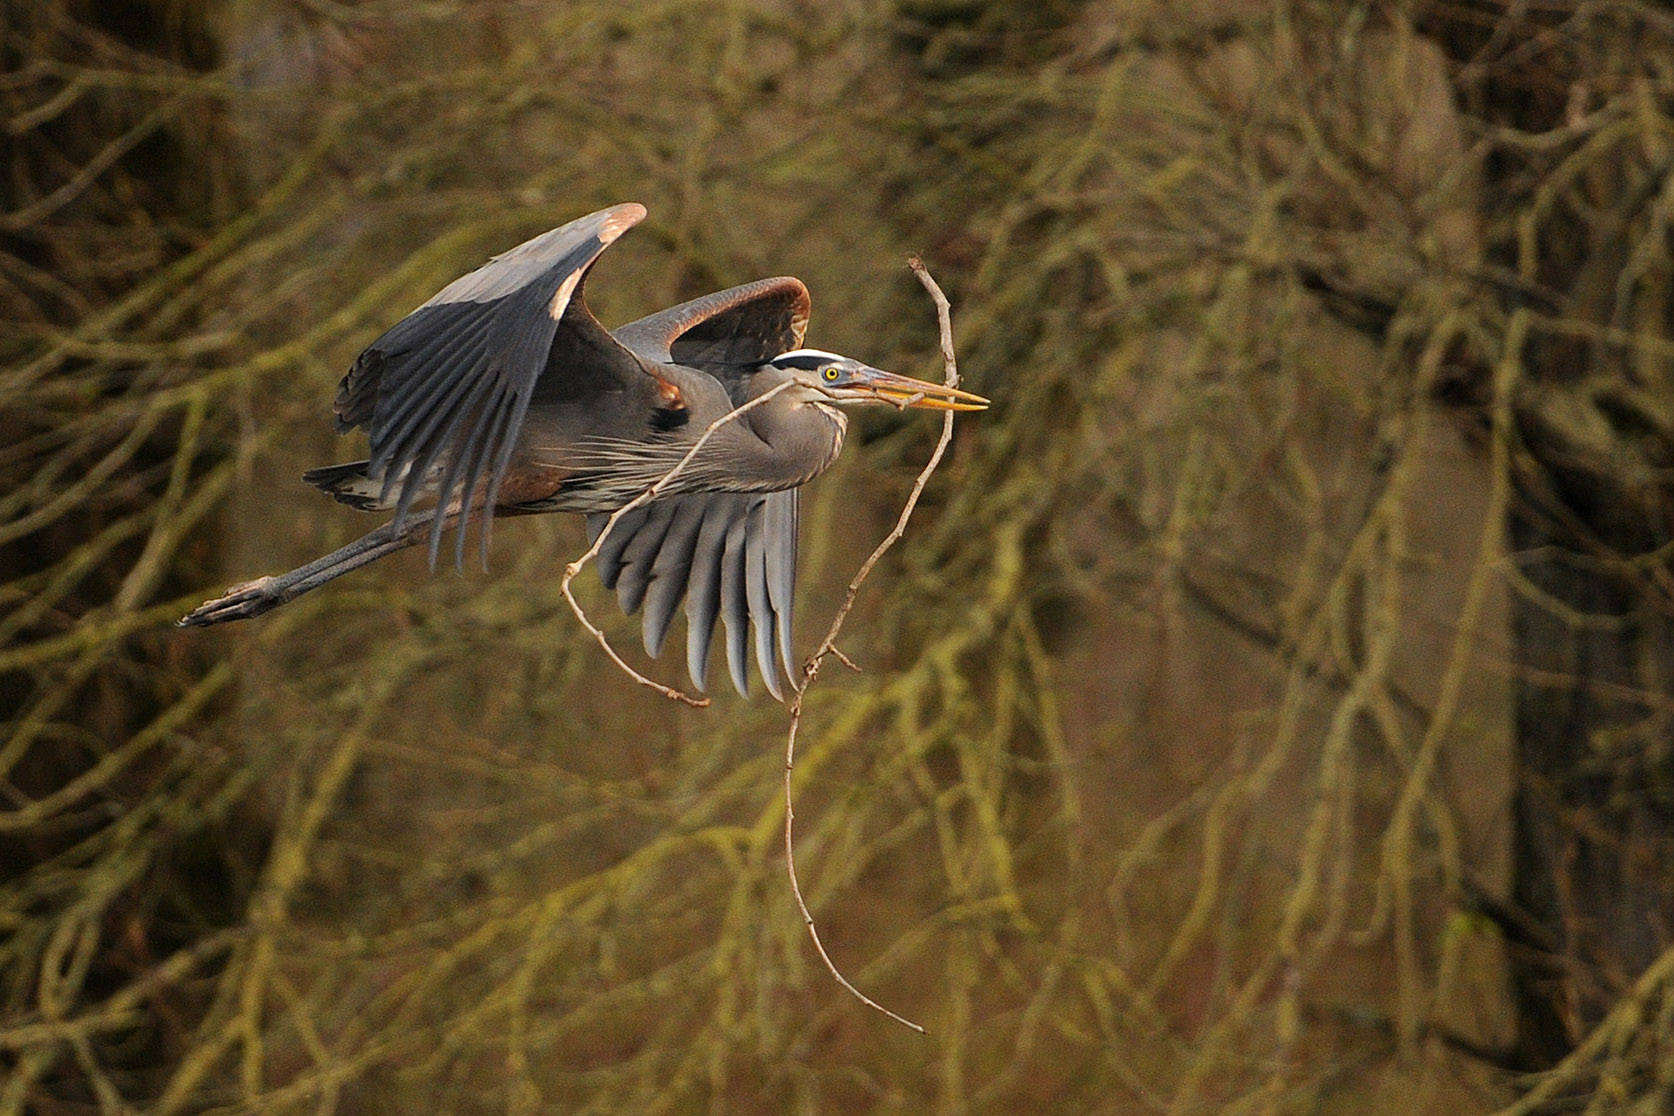 A heron brings a twig back to its nest at the Great Blue Heron Nature Reserve in Chilliwack on March 18, 2015. Tuesday, Jan. 5, 2021 is Bird Day. (Jenna Hauck/ Chilliwack Progress file)